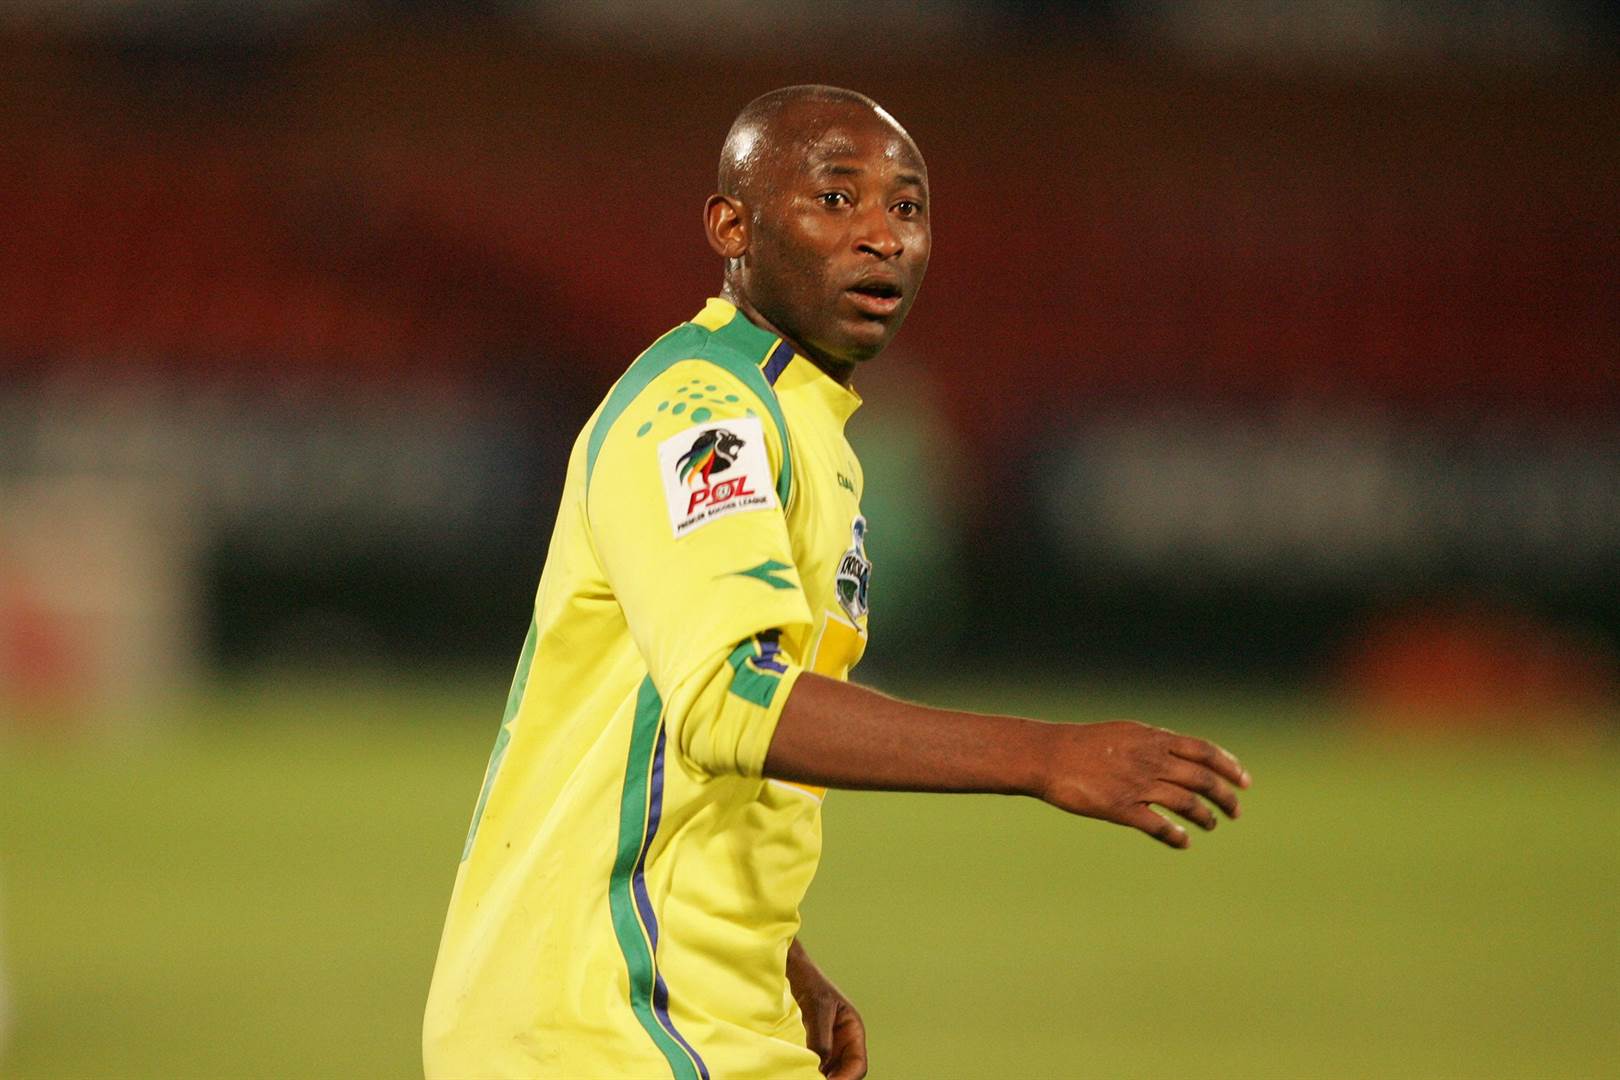 Peter Ndlovu left Englands to sign for Downs in 20